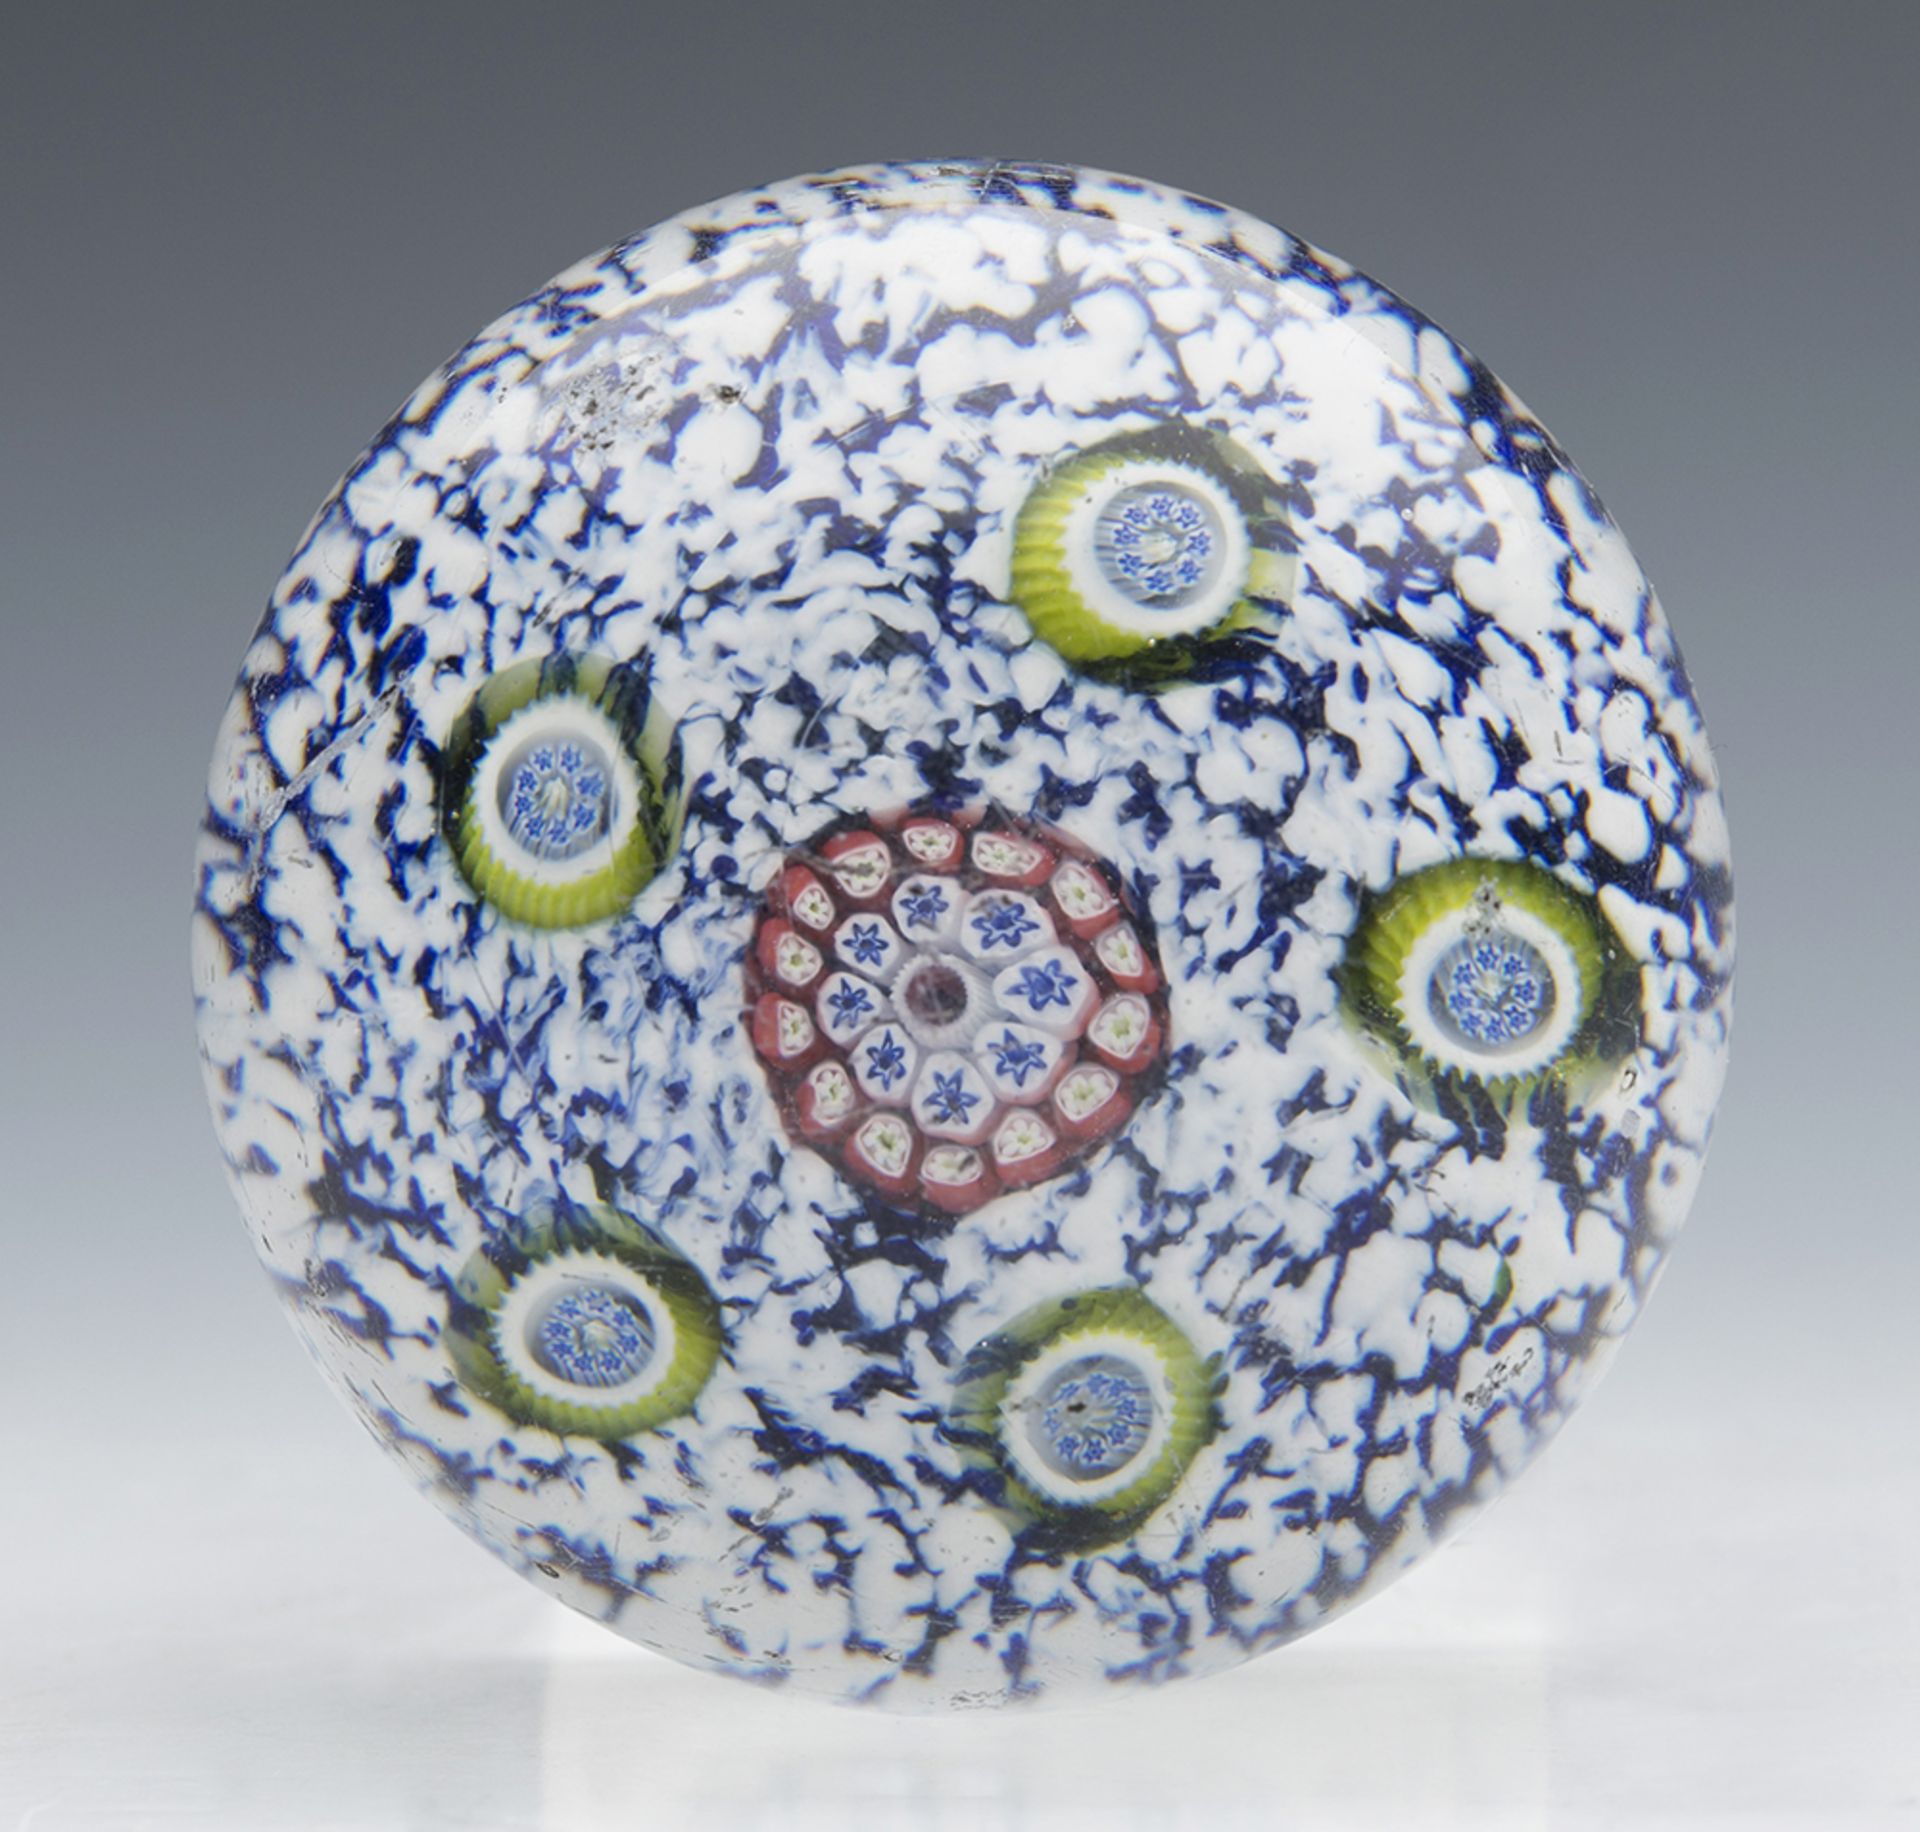 ANTIQUE FRENCH ST LOUIS MILLEFIORI PAPERWEIGHT C.1850